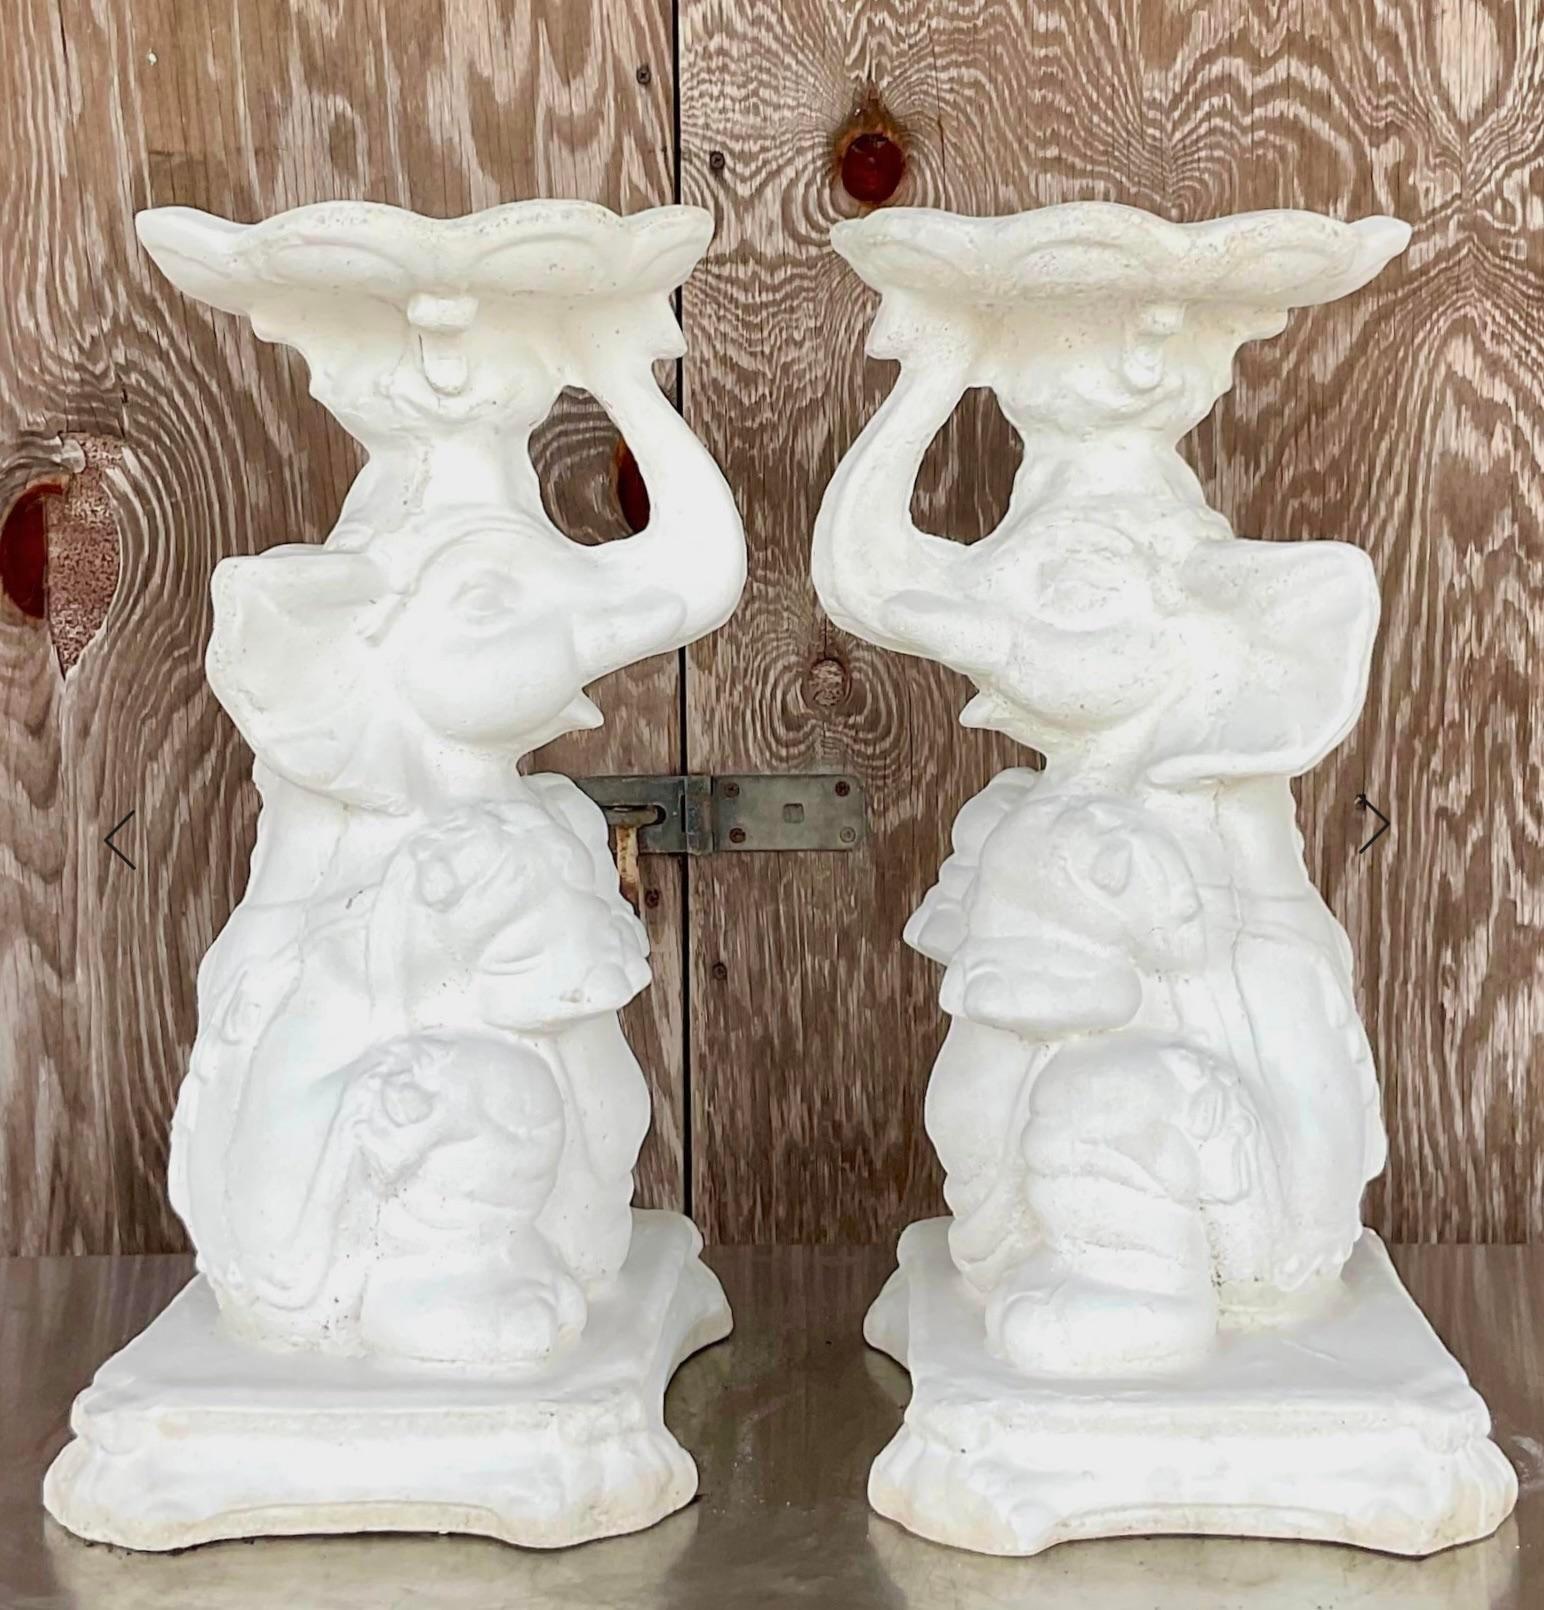 Vintage Boho Cement Elephants - a Pair In Good Condition For Sale In west palm beach, FL